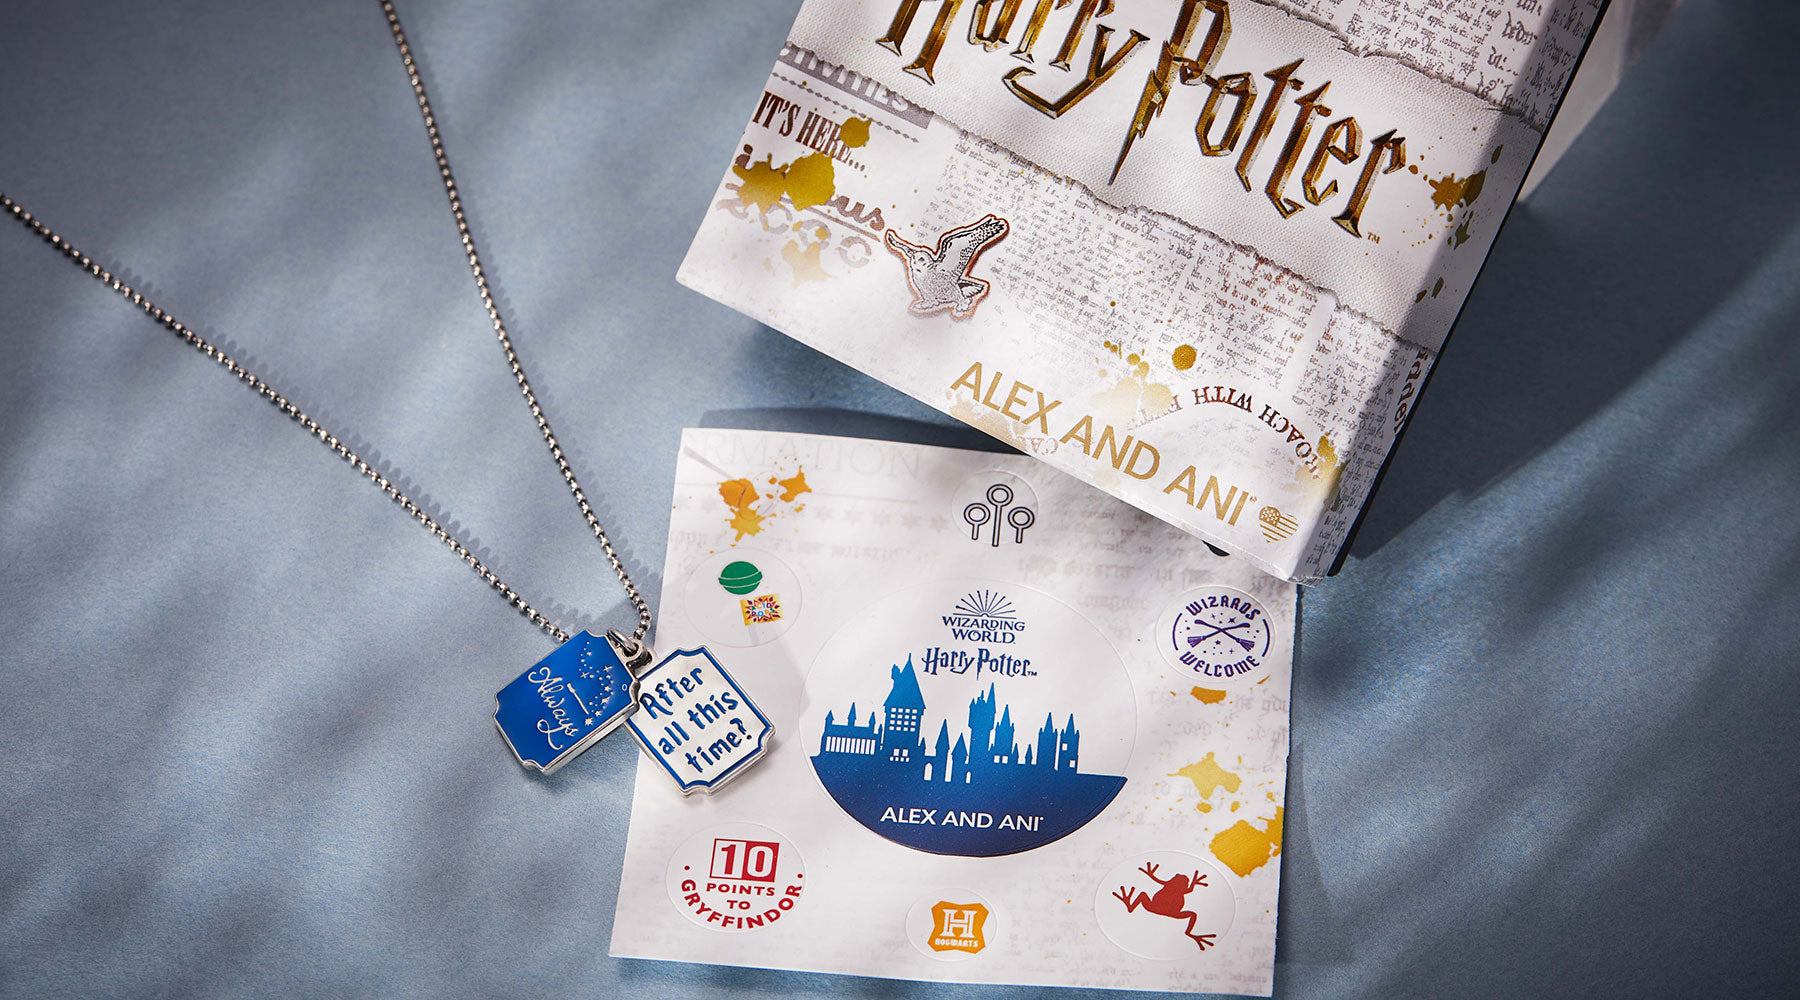 Put some magic in your life with enchantingly exclusive Harry Potter merch